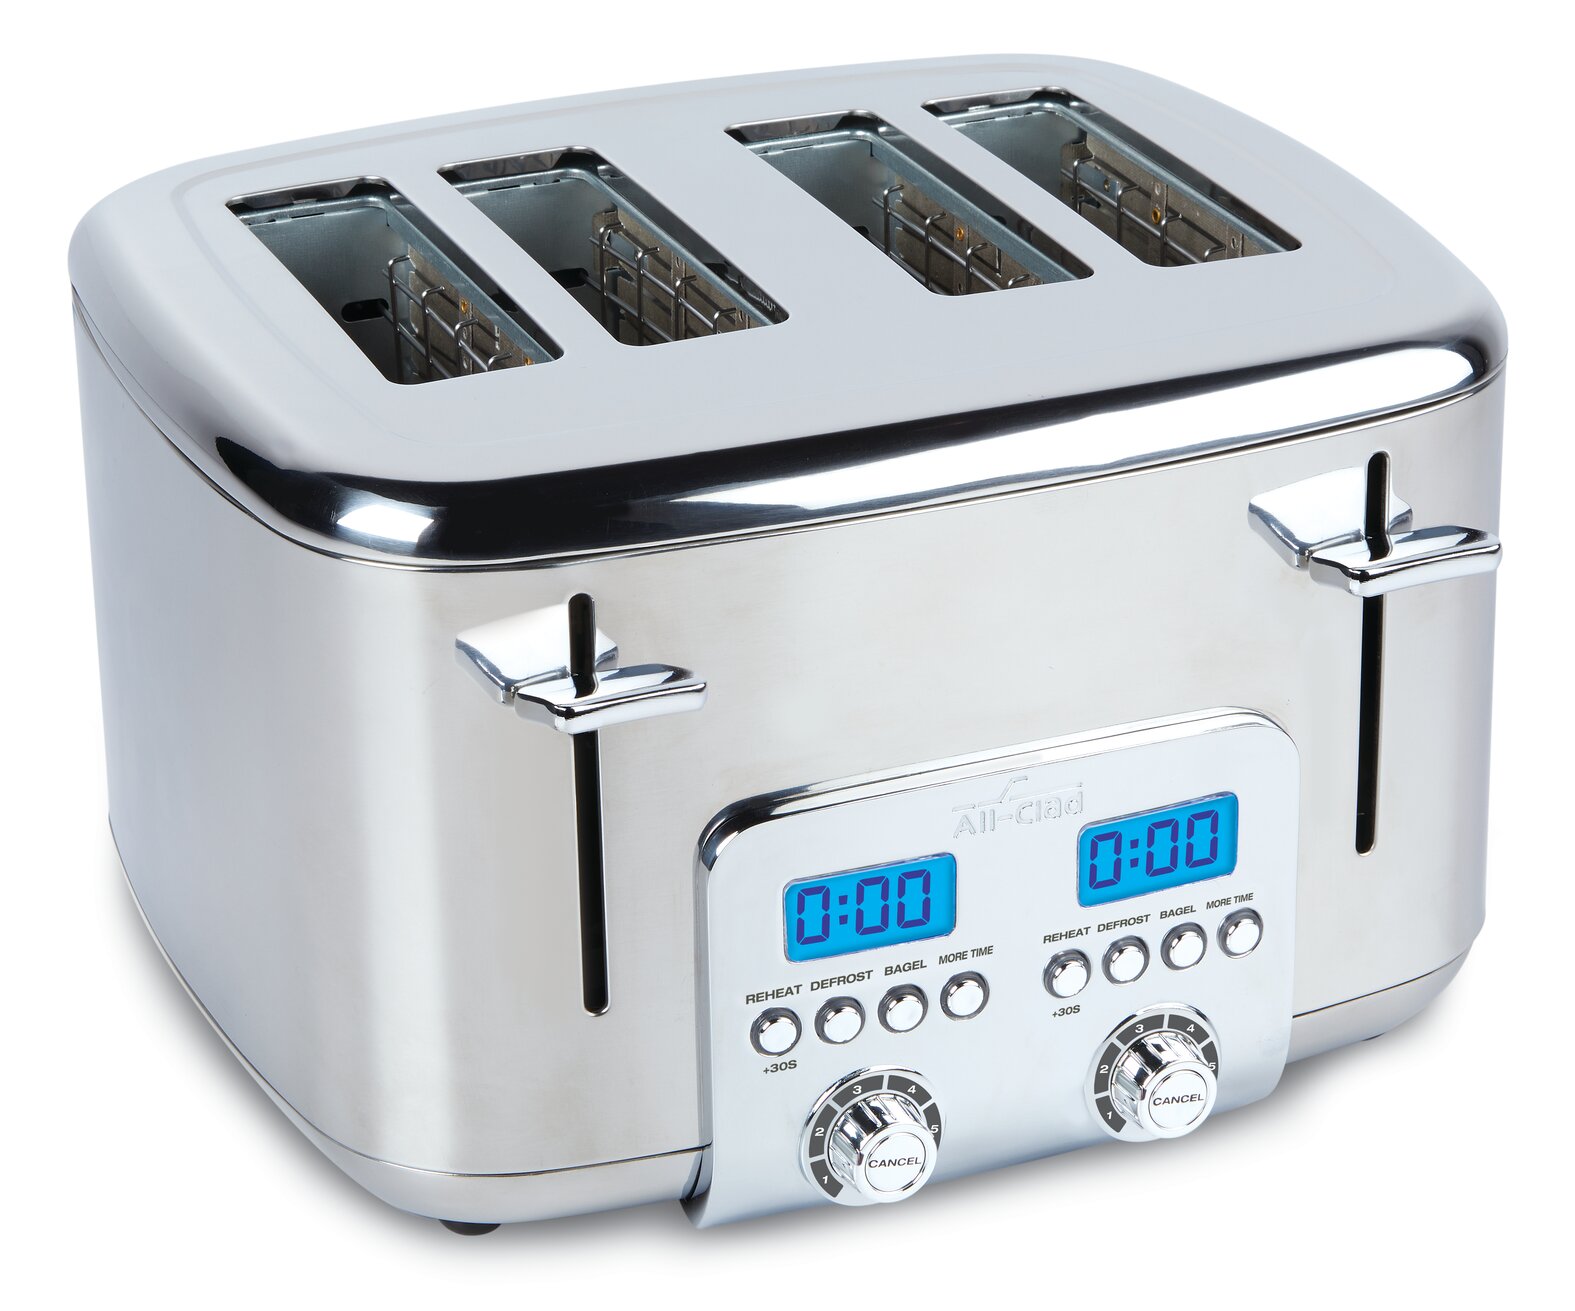 All-Clad Belgian Stainless Steel 4 Slice WaffleMaker 